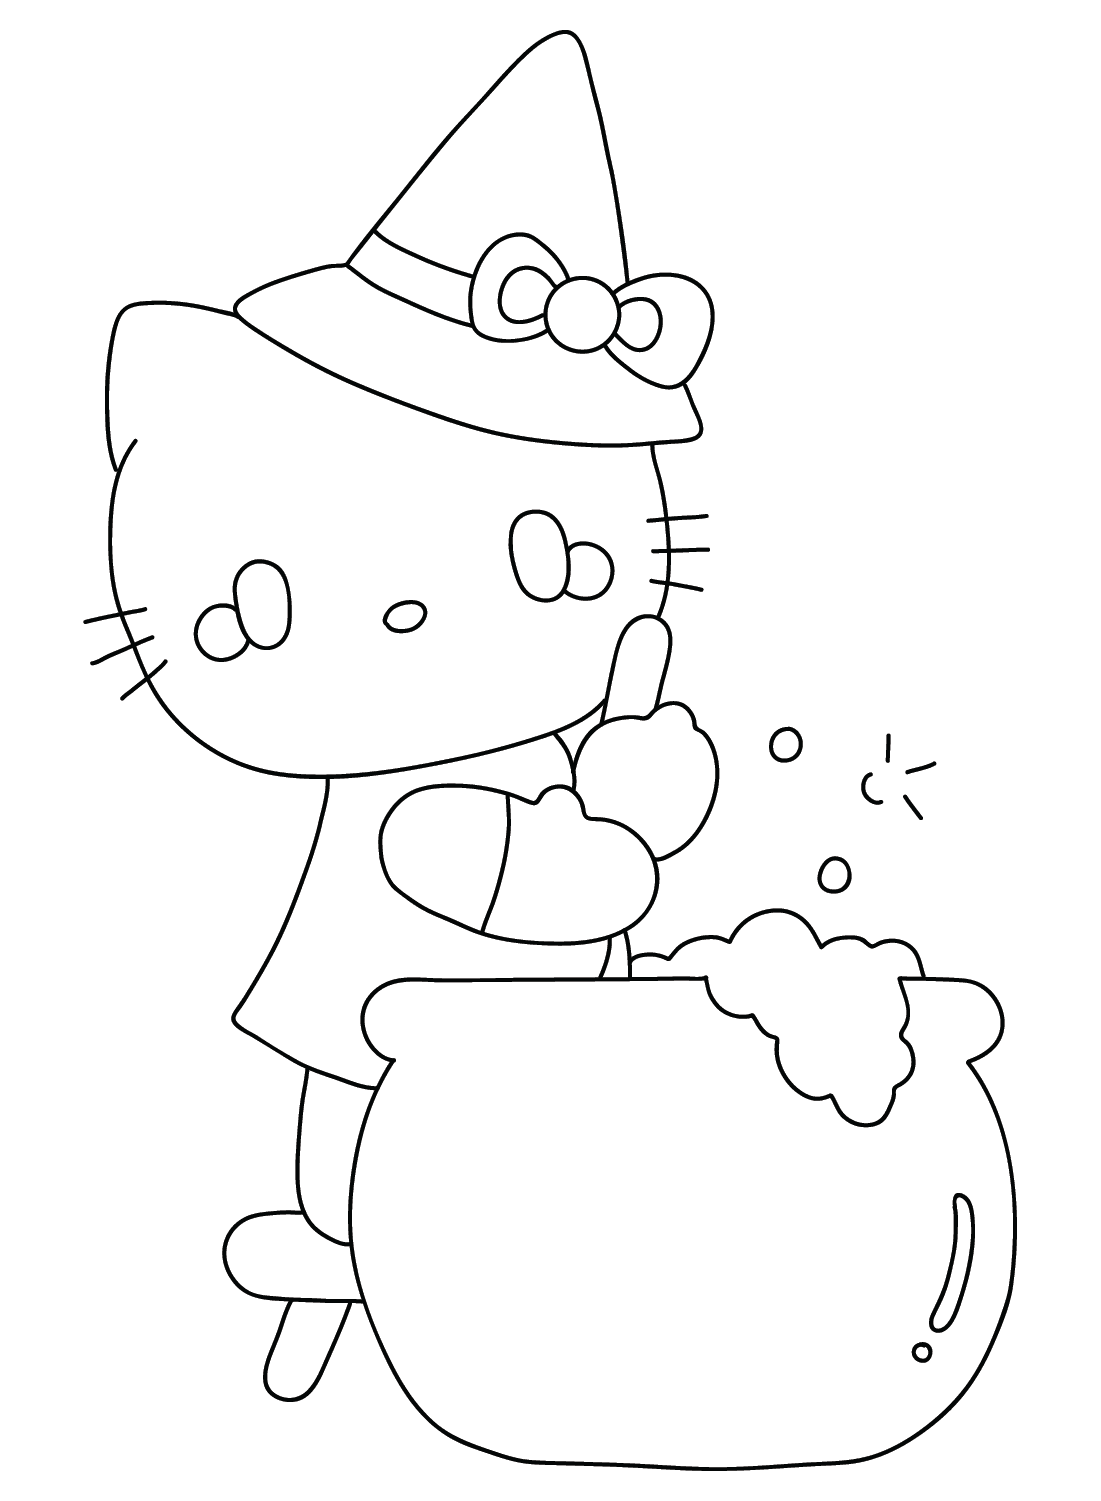 Halloween Hello Kitty Cute Coloring Page from Halloween Hello Kitty